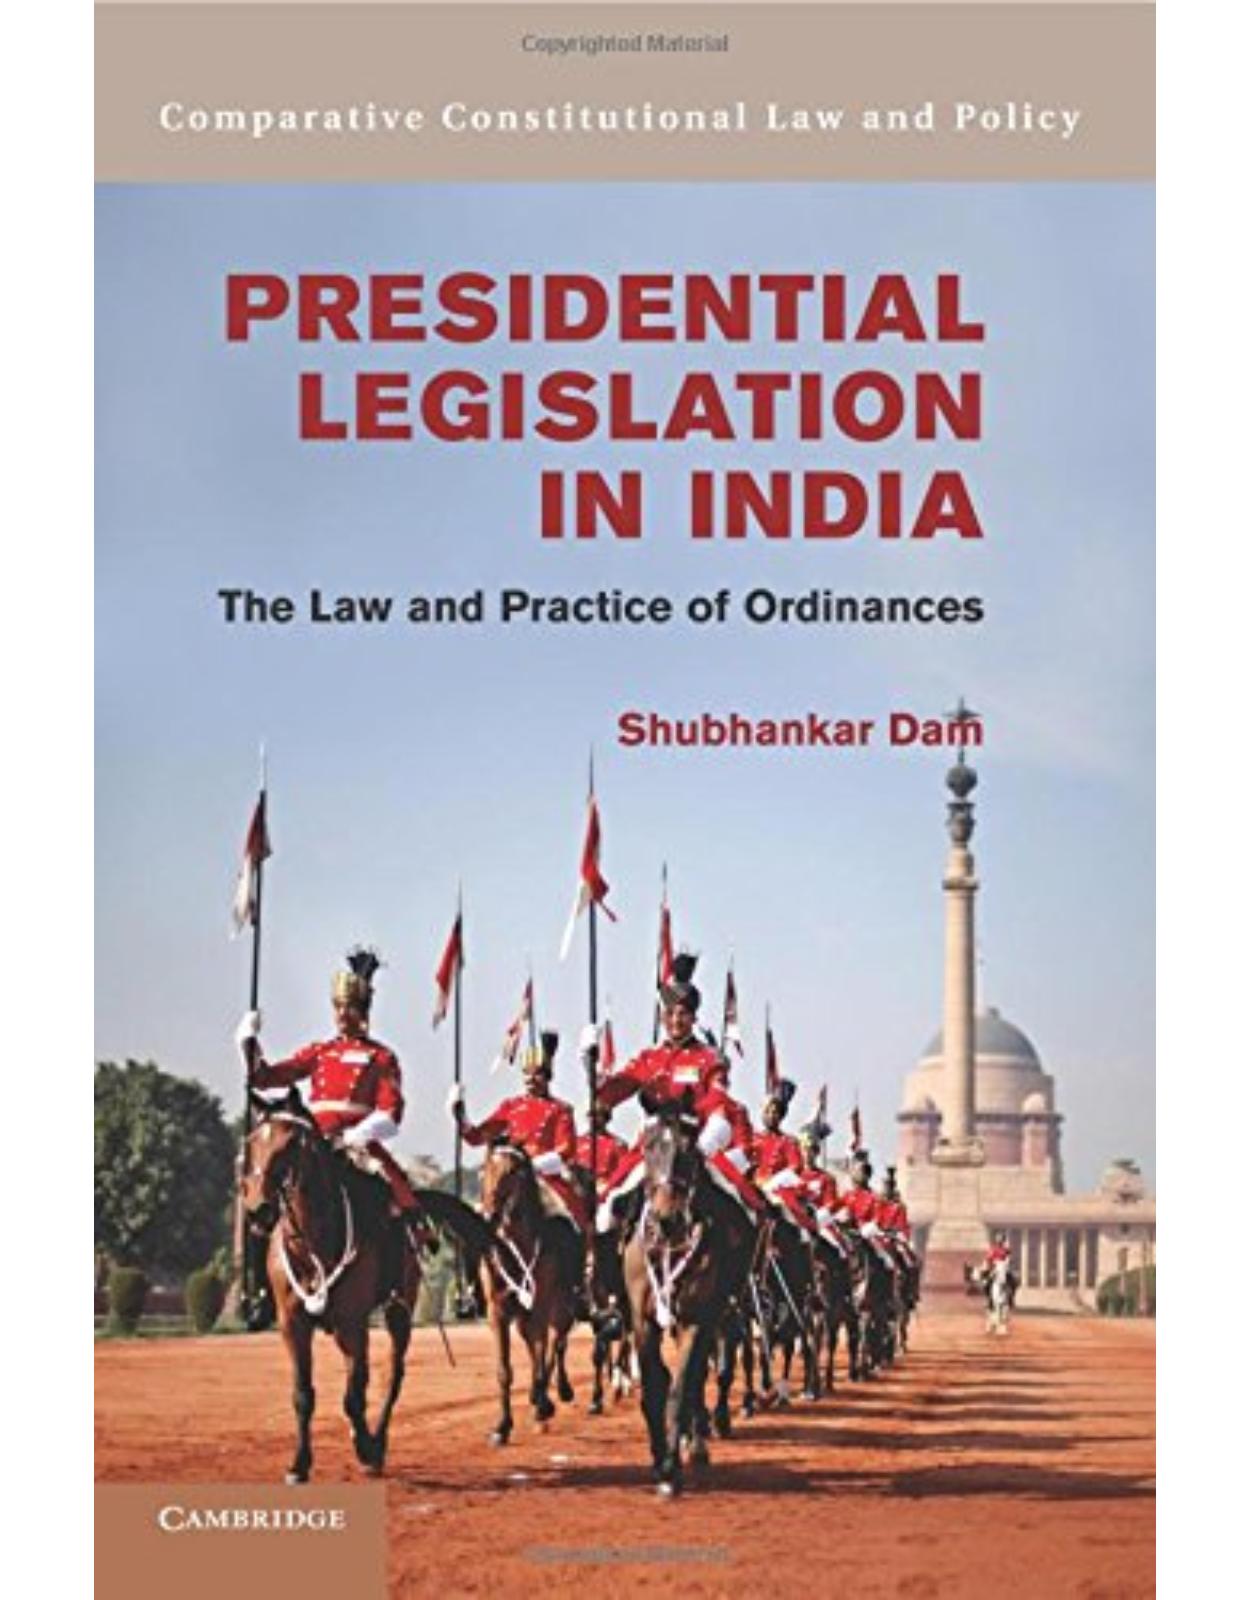 Presidential Legislation in India: The Law and Practice of Ordinances (Comparative Constitutional Law and Policy)